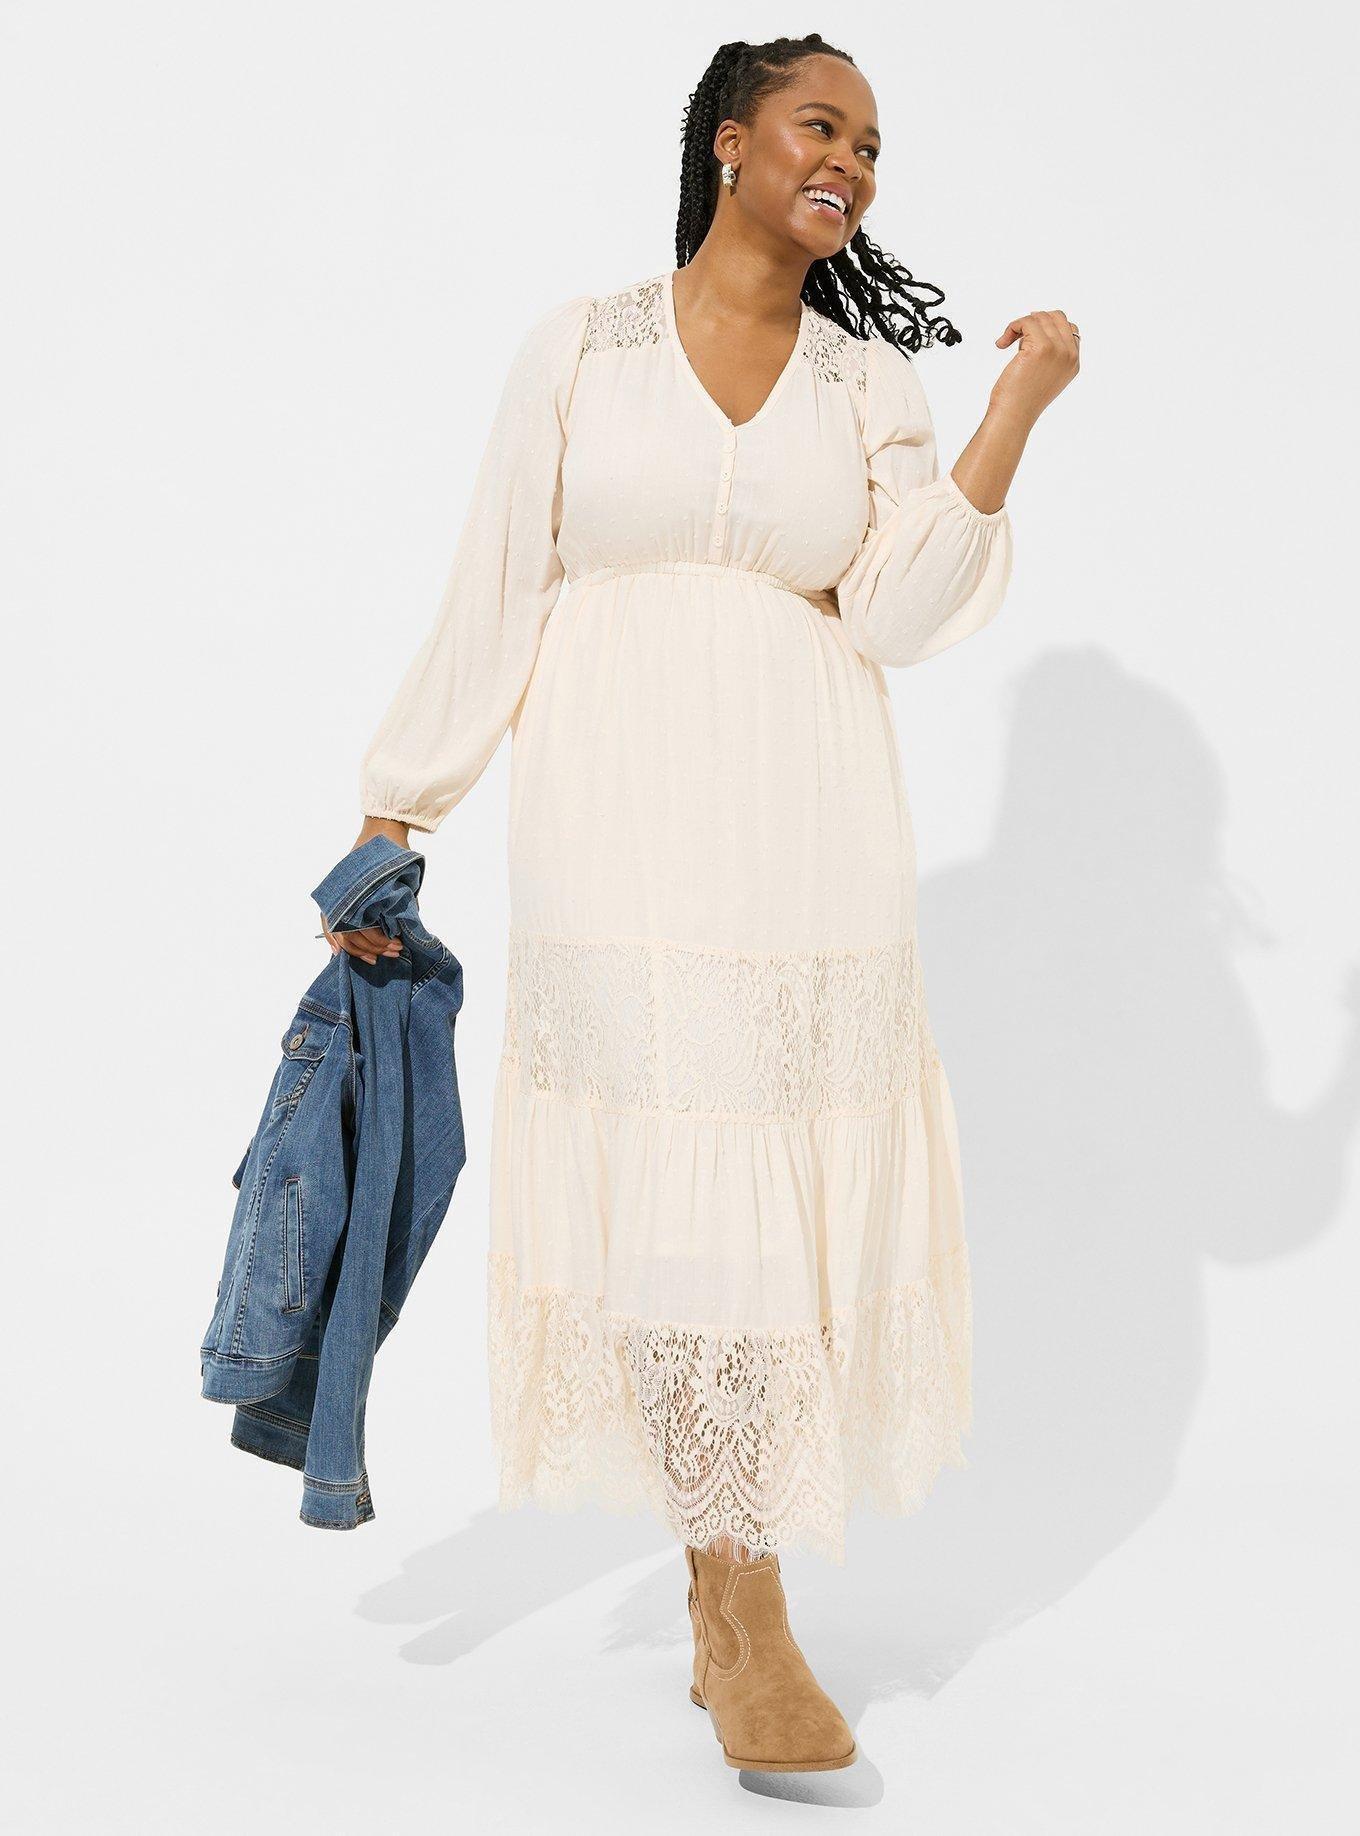 Plus Size Fashion - Torrid love the dress and that jacket.